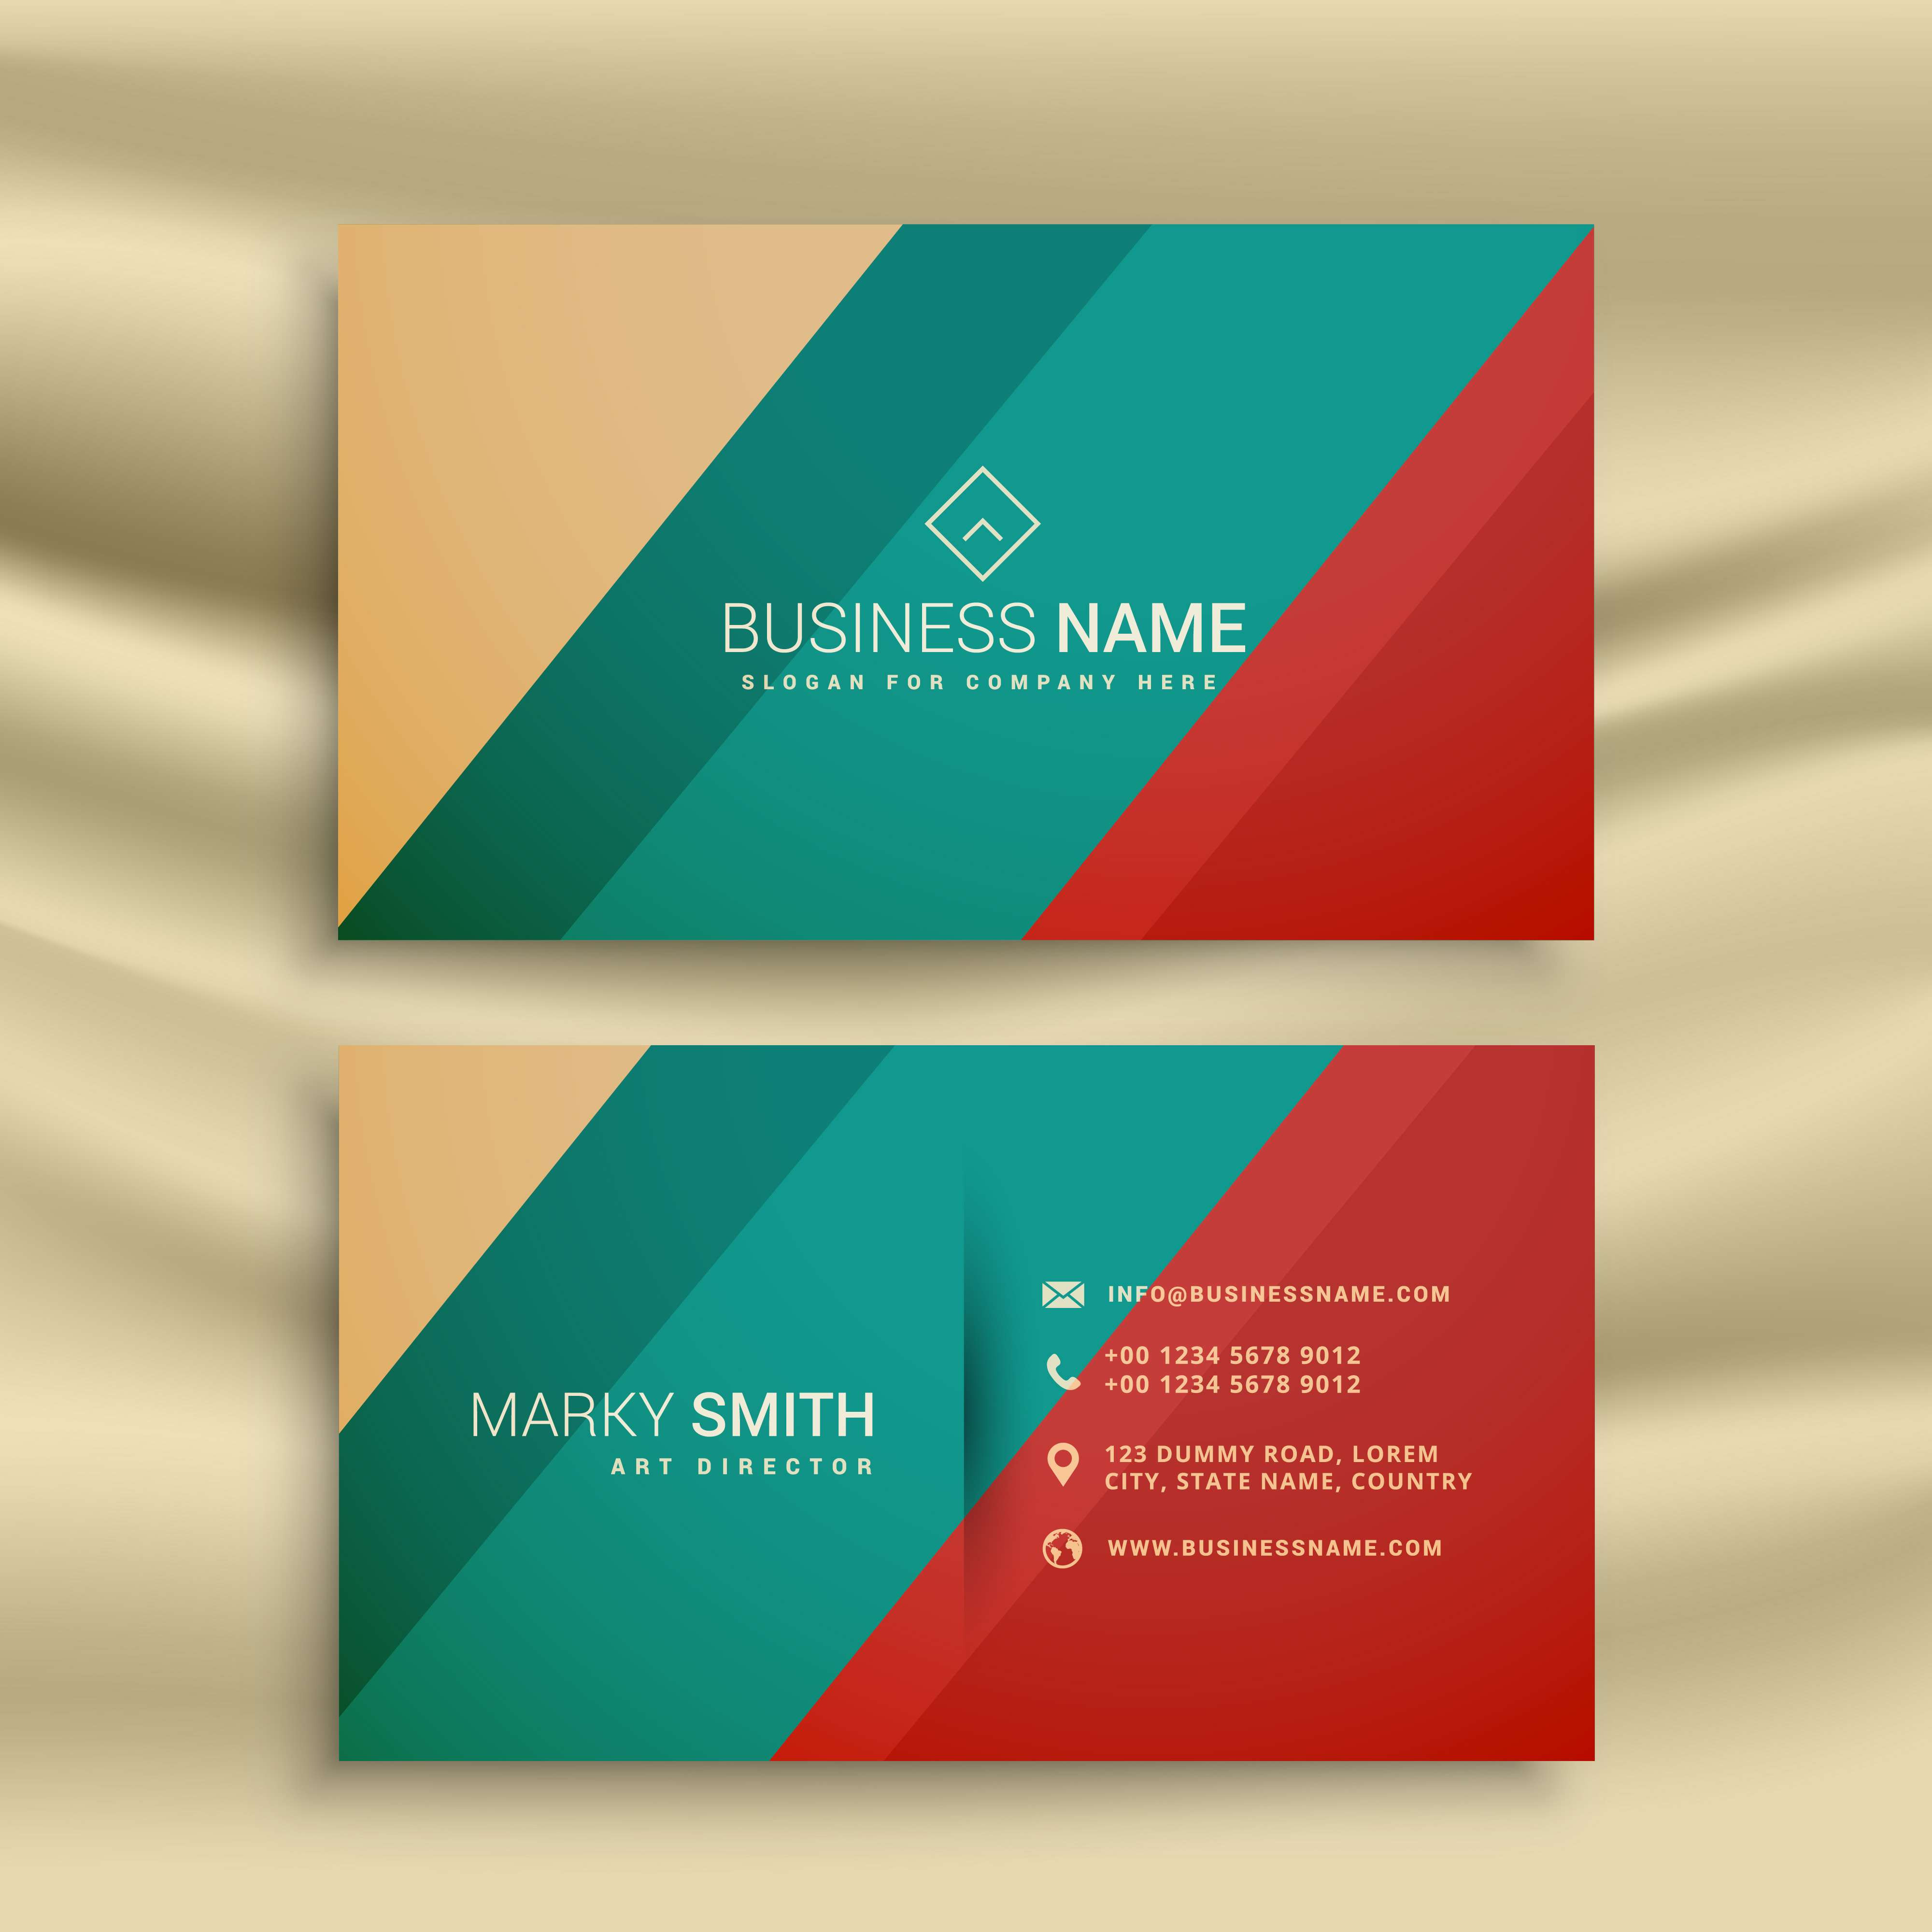 vintage business card template lovely creative business card design with retro colors free of vintage business card template